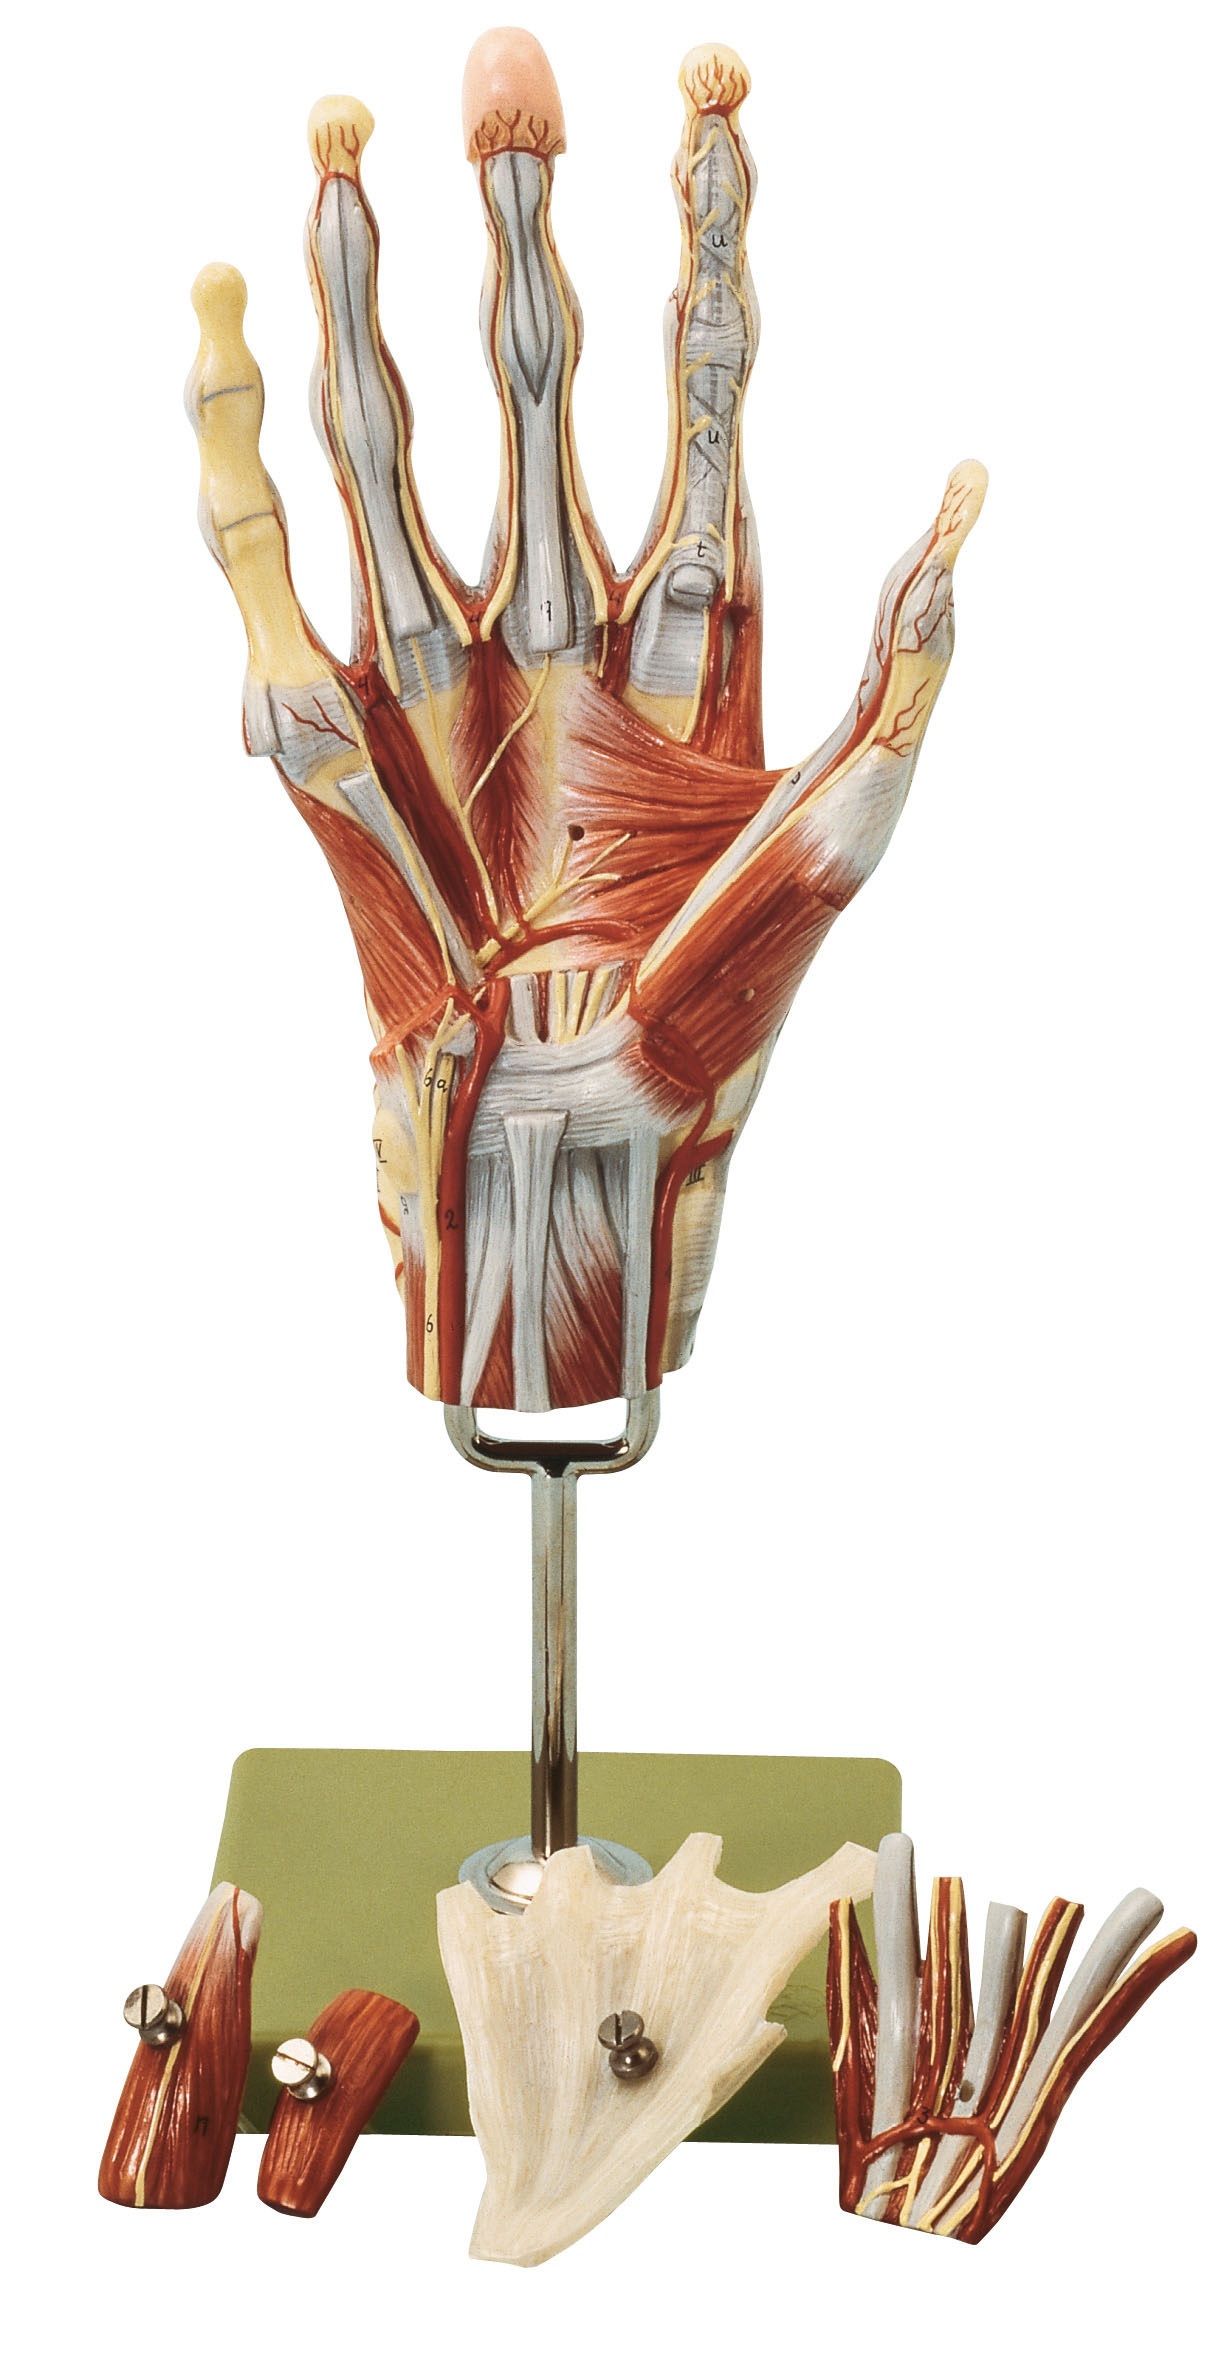 Muscles of the Hand With Base of the Forearm, Light